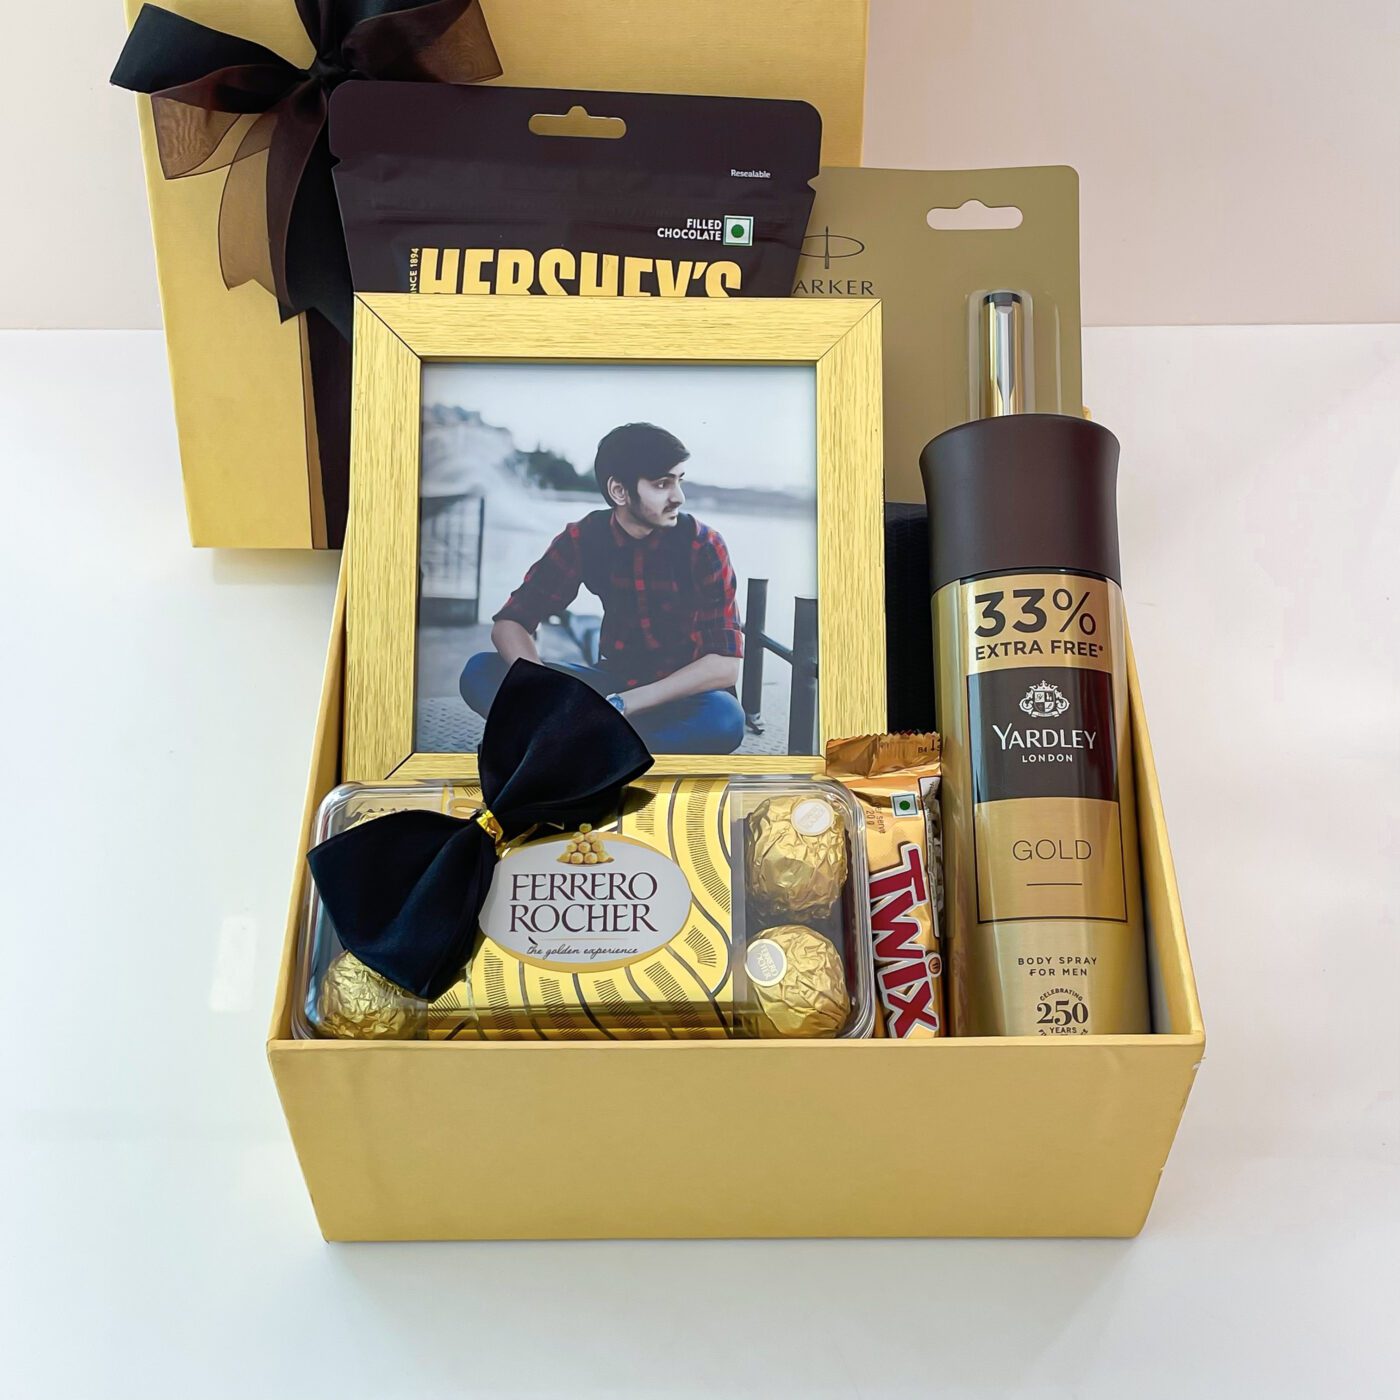 Reveal more than 205 gift items for men